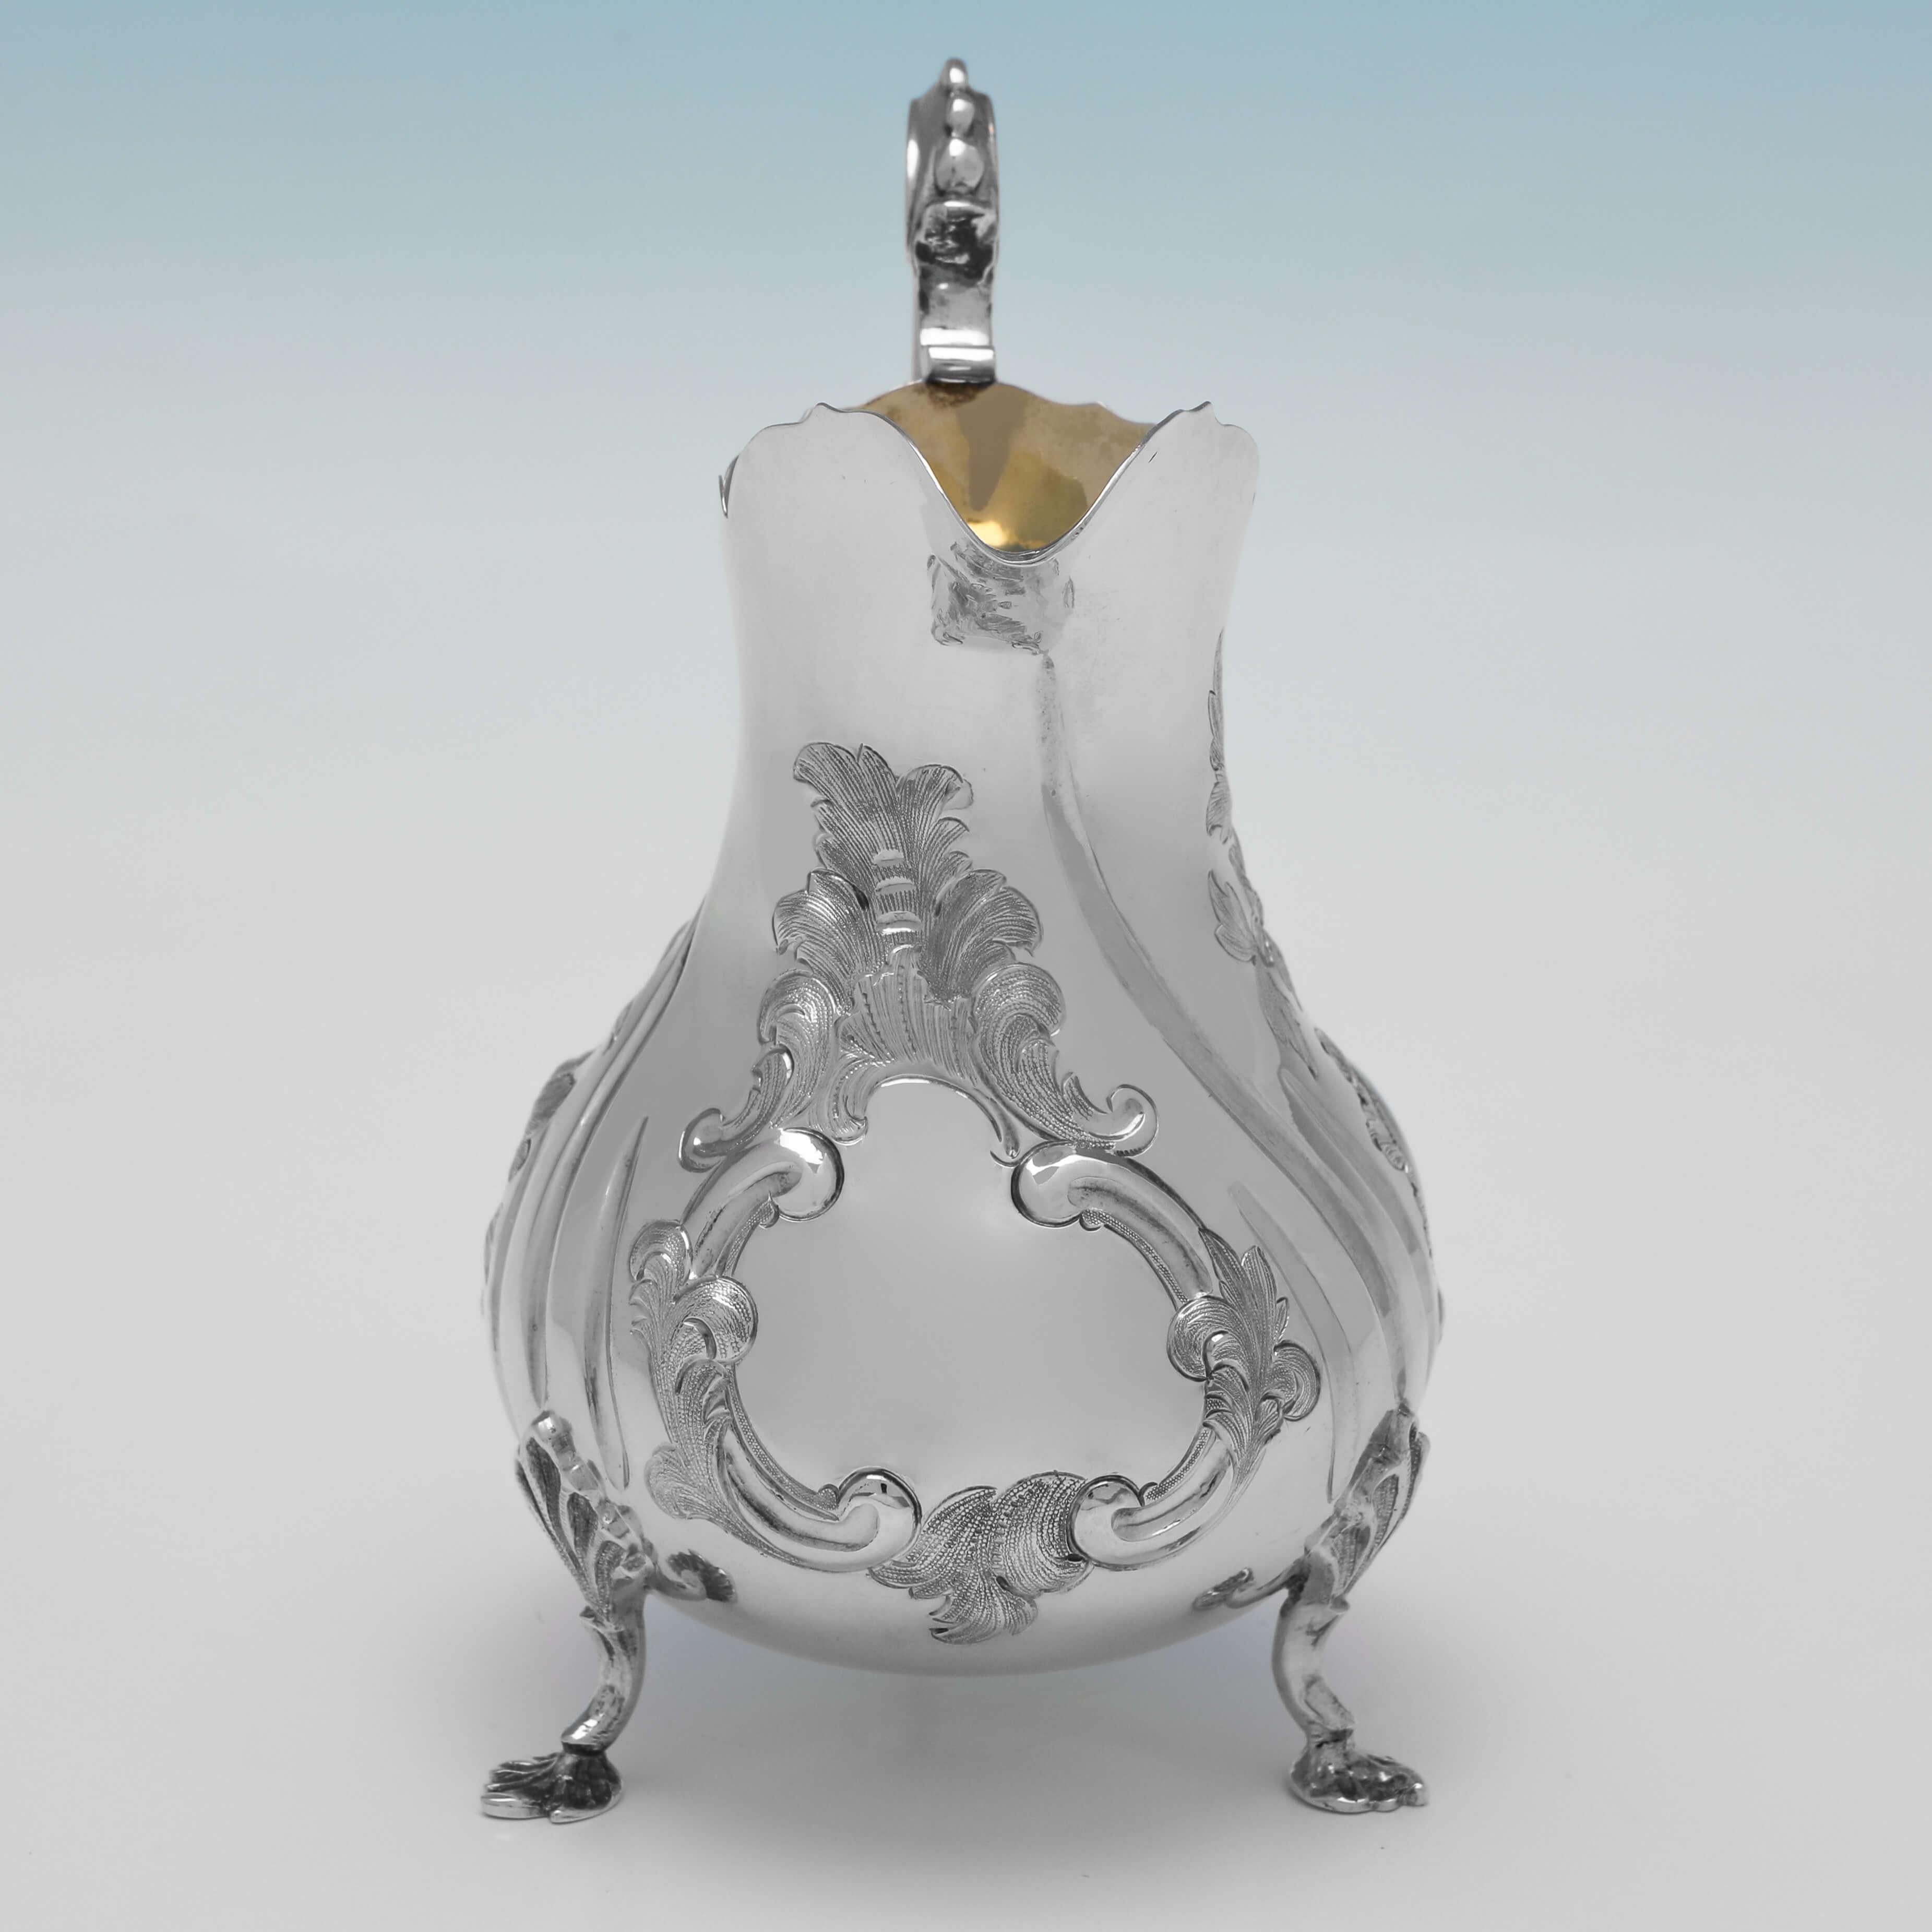 Hallmarked in London in 1856 by George John Richards, this very attractive, Victorian, Antique Sterling Silver Cream Jug, stands on three scroll feet, and features a gilt interior, and chased floral and scroll decoration to the body. 

The cream